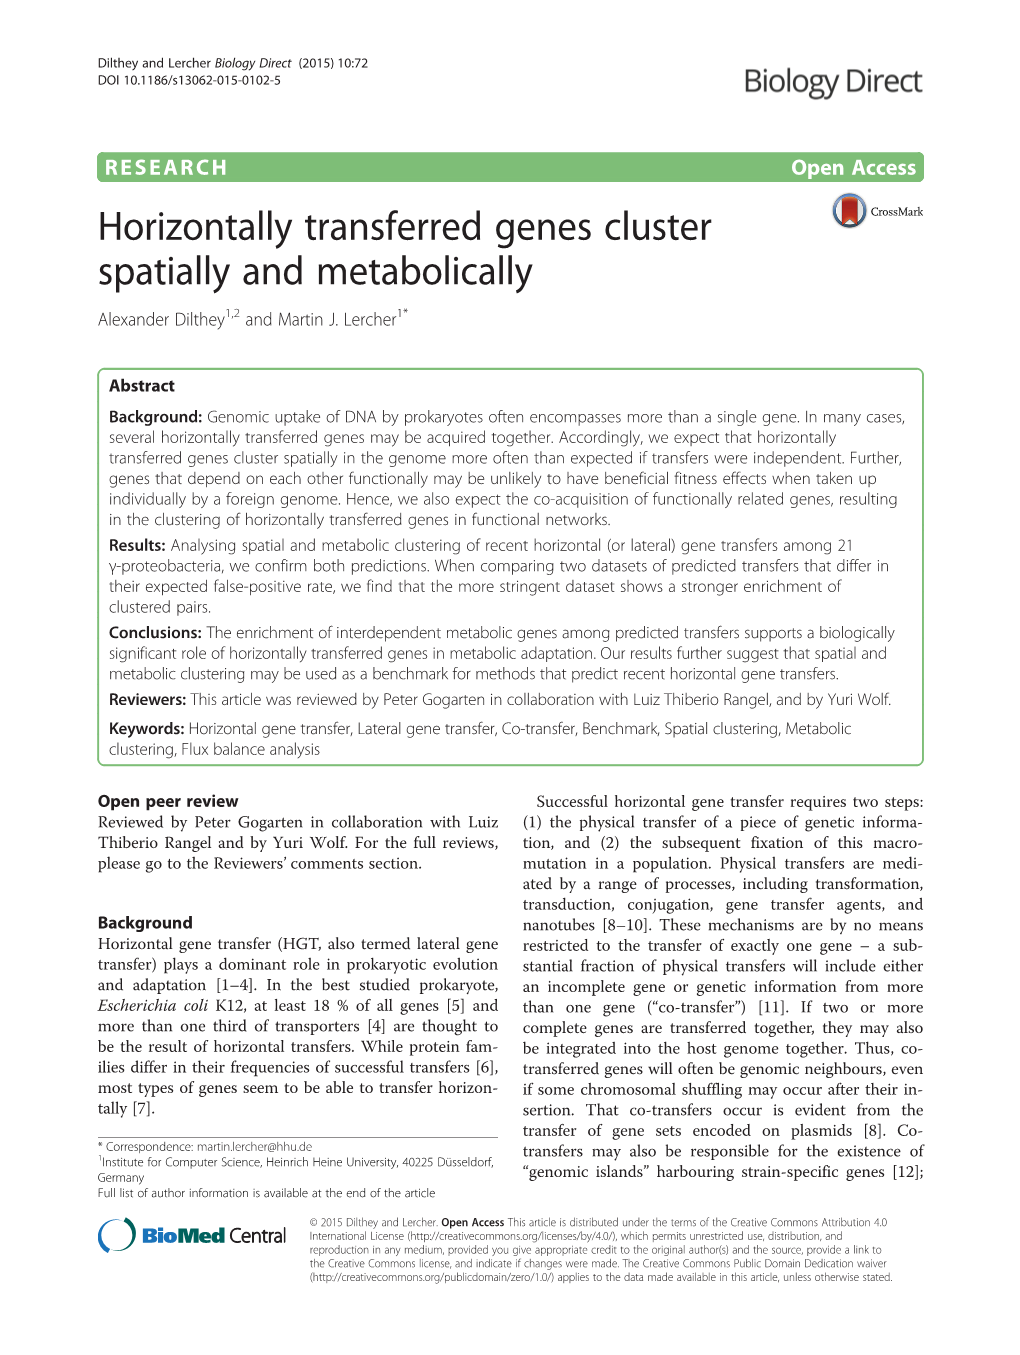 Horizontally Transferred Genes Cluster Spatially and Metabolically Alexander Dilthey1,2 and Martin J